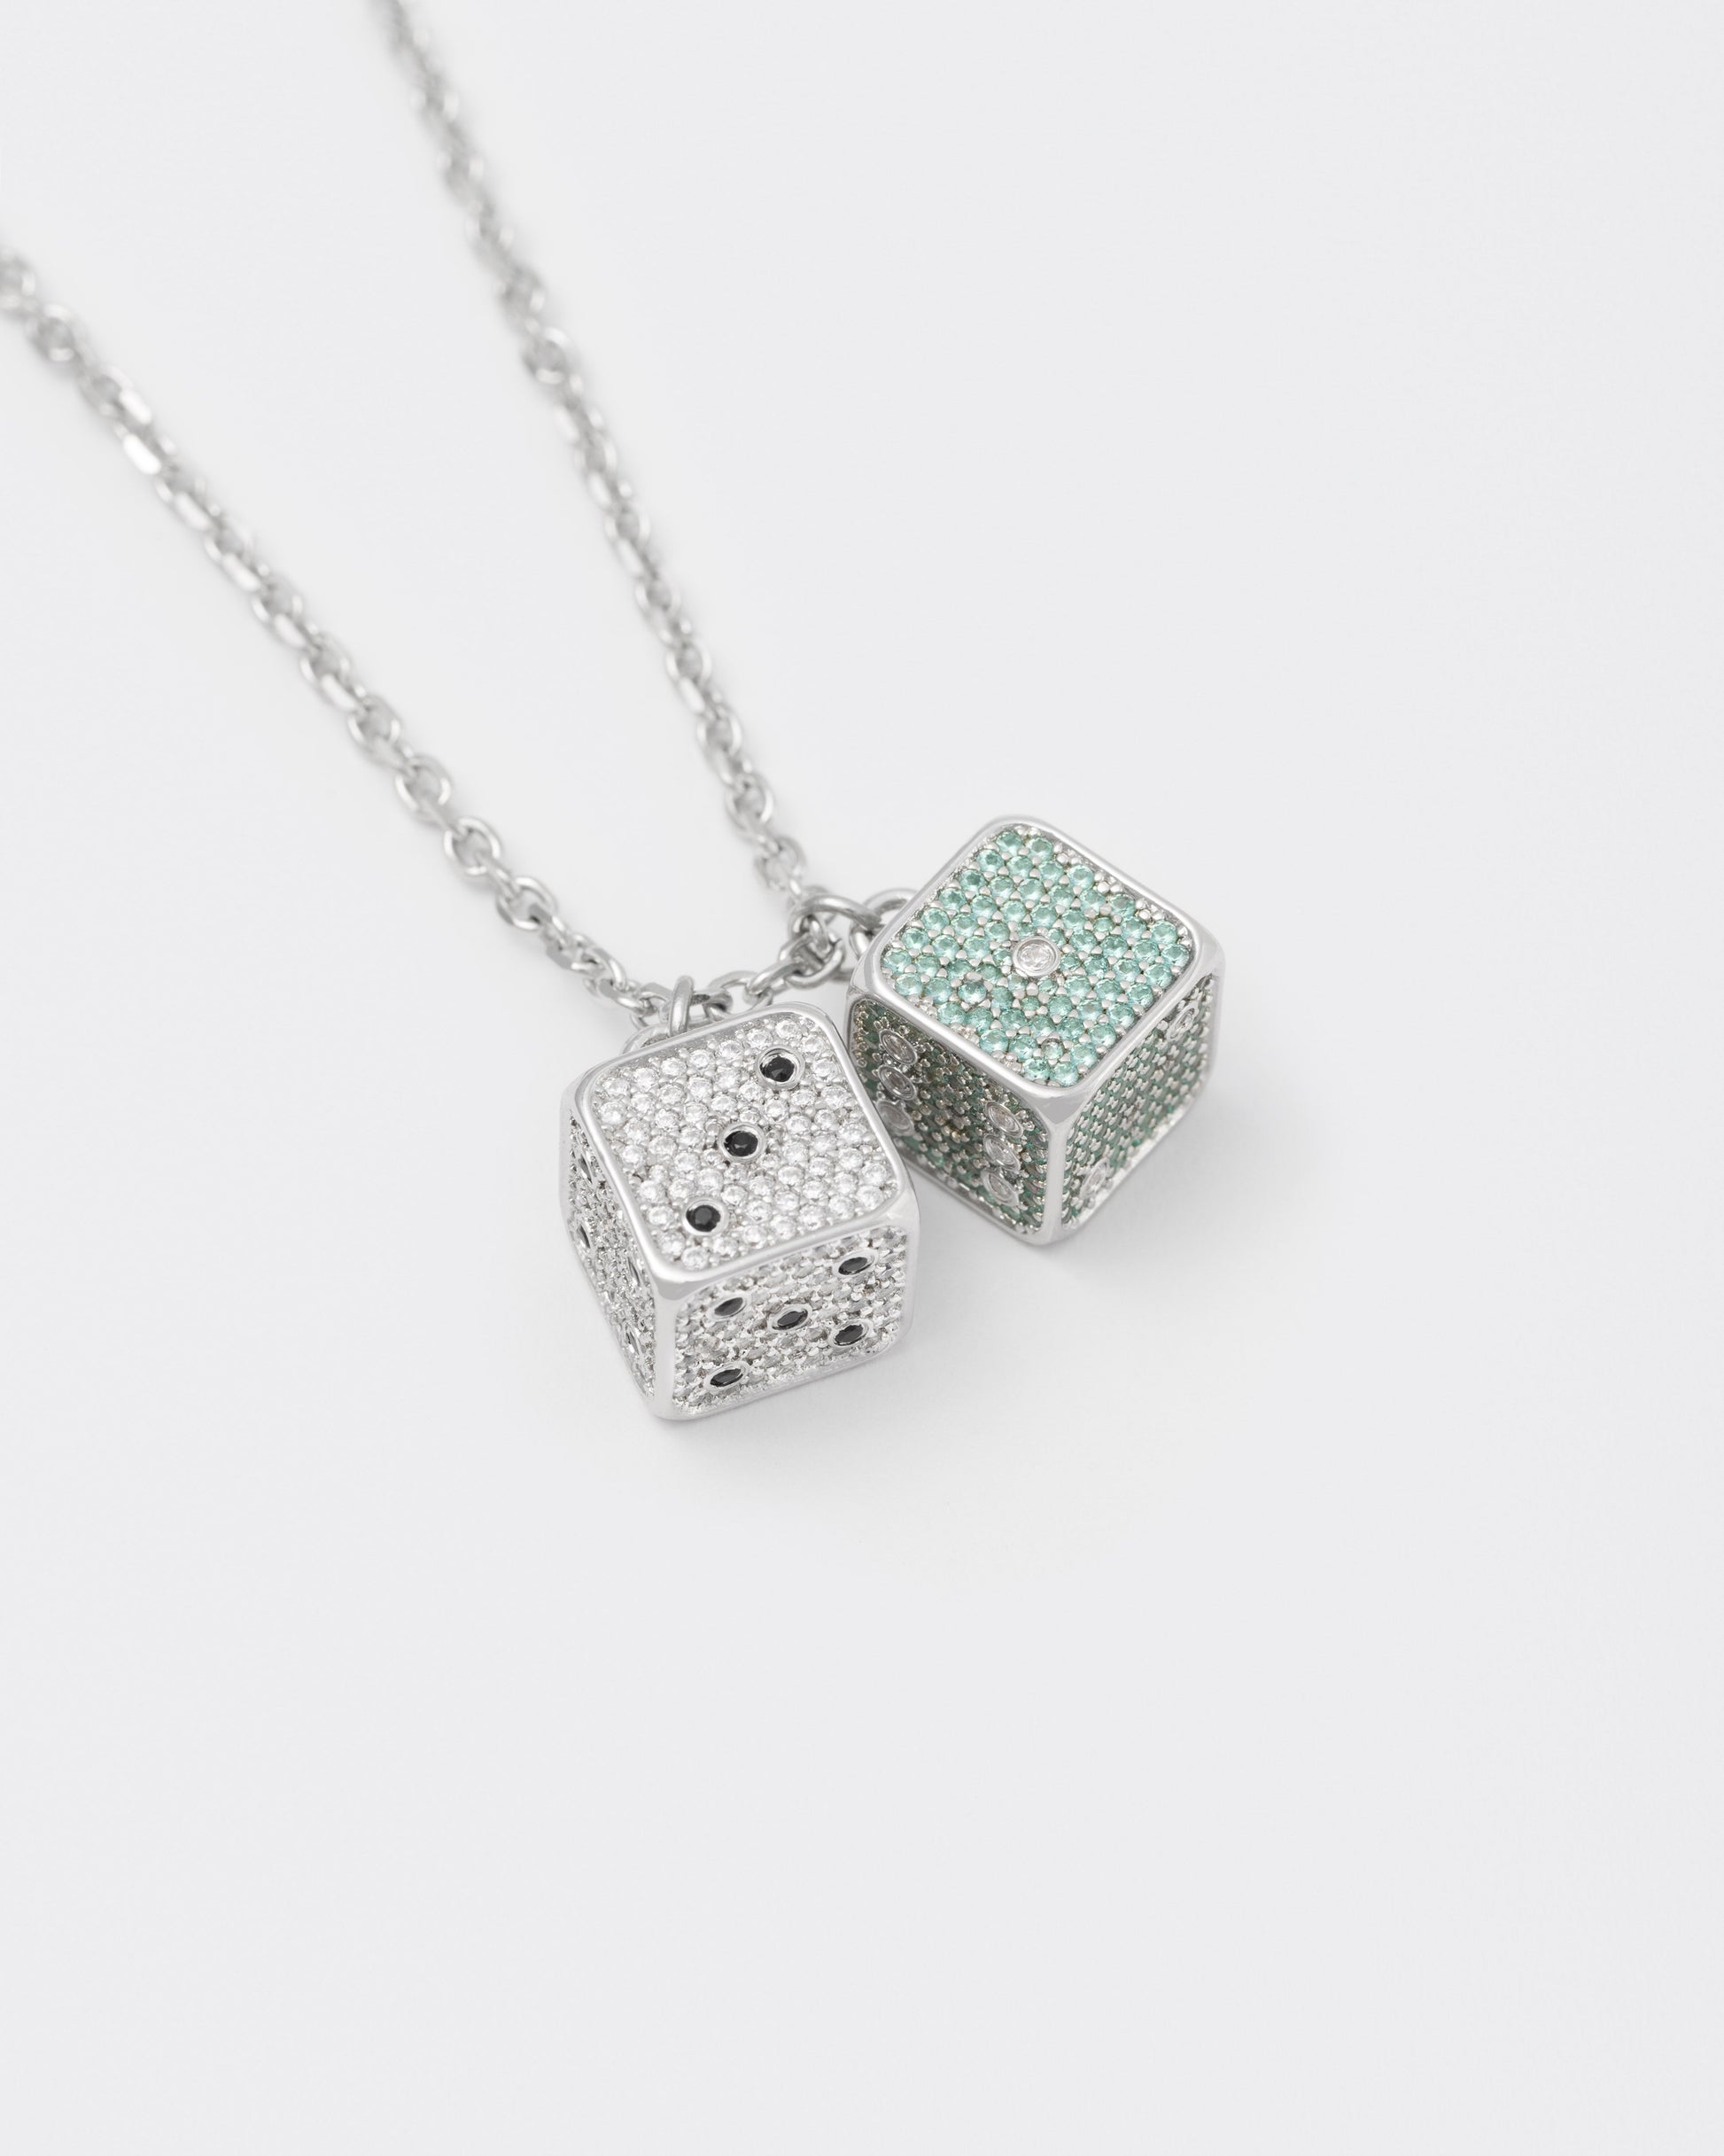 detail of 18k white gold coated asymmetrical dice pendant necklace with contrasting hand-set micropavè stones in white and tourmaline and counting dots in black and white stones